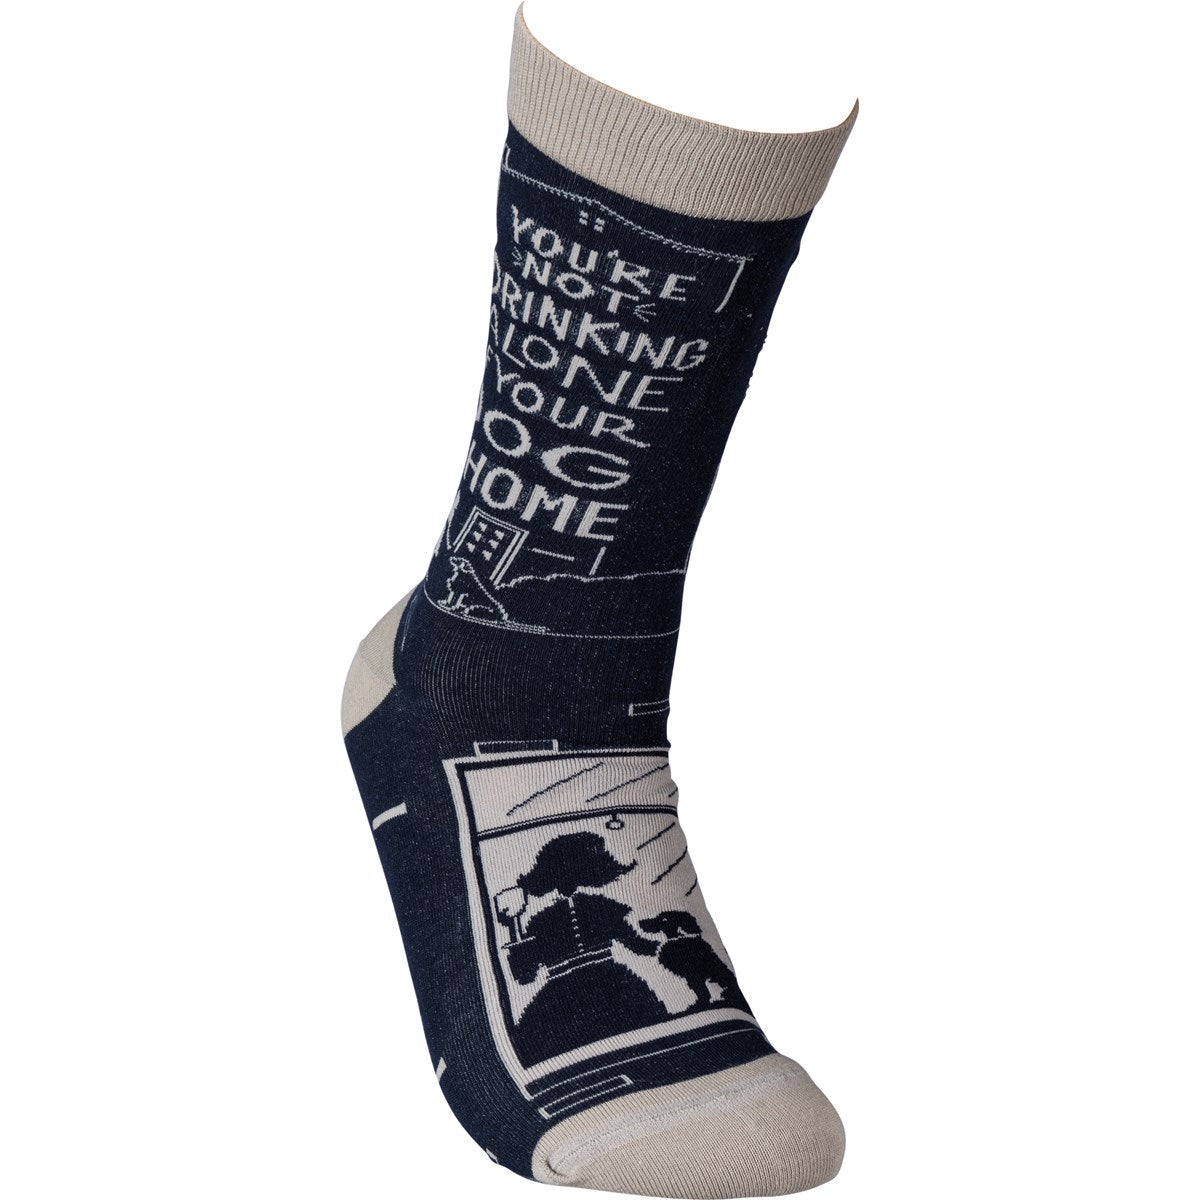 💙 Not Drinking Alone If Your Dog Is Home Unisex Fun Socks